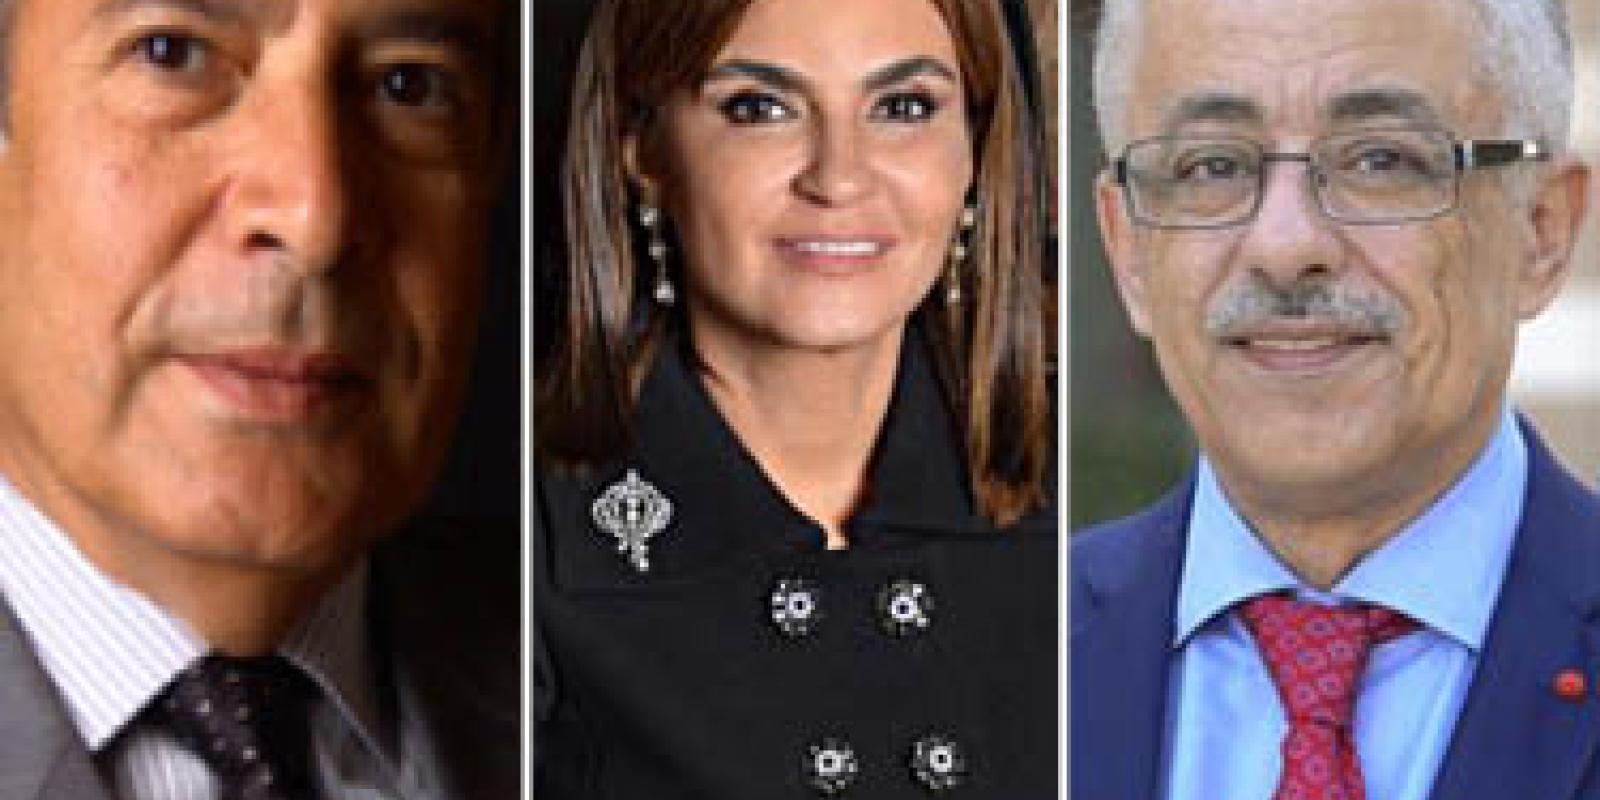 Three members of the AUC community have recently been appointed ministers for the Egyptian government